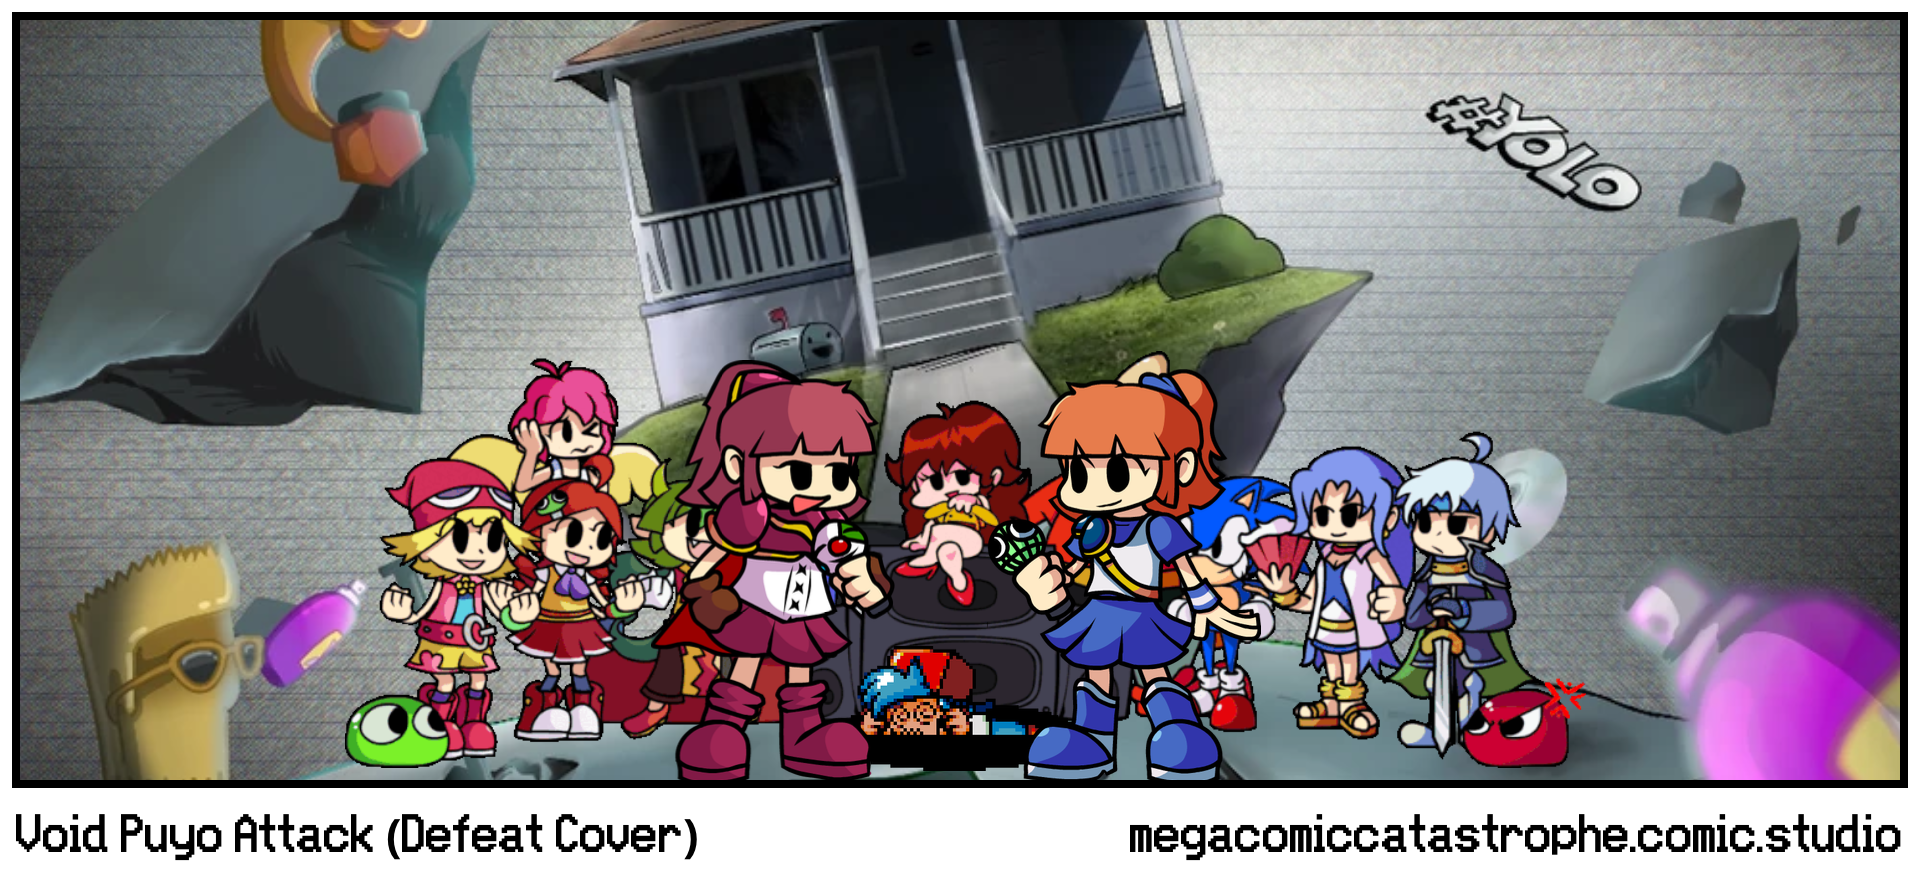 Void Puyo Attack (Defeat Cover)